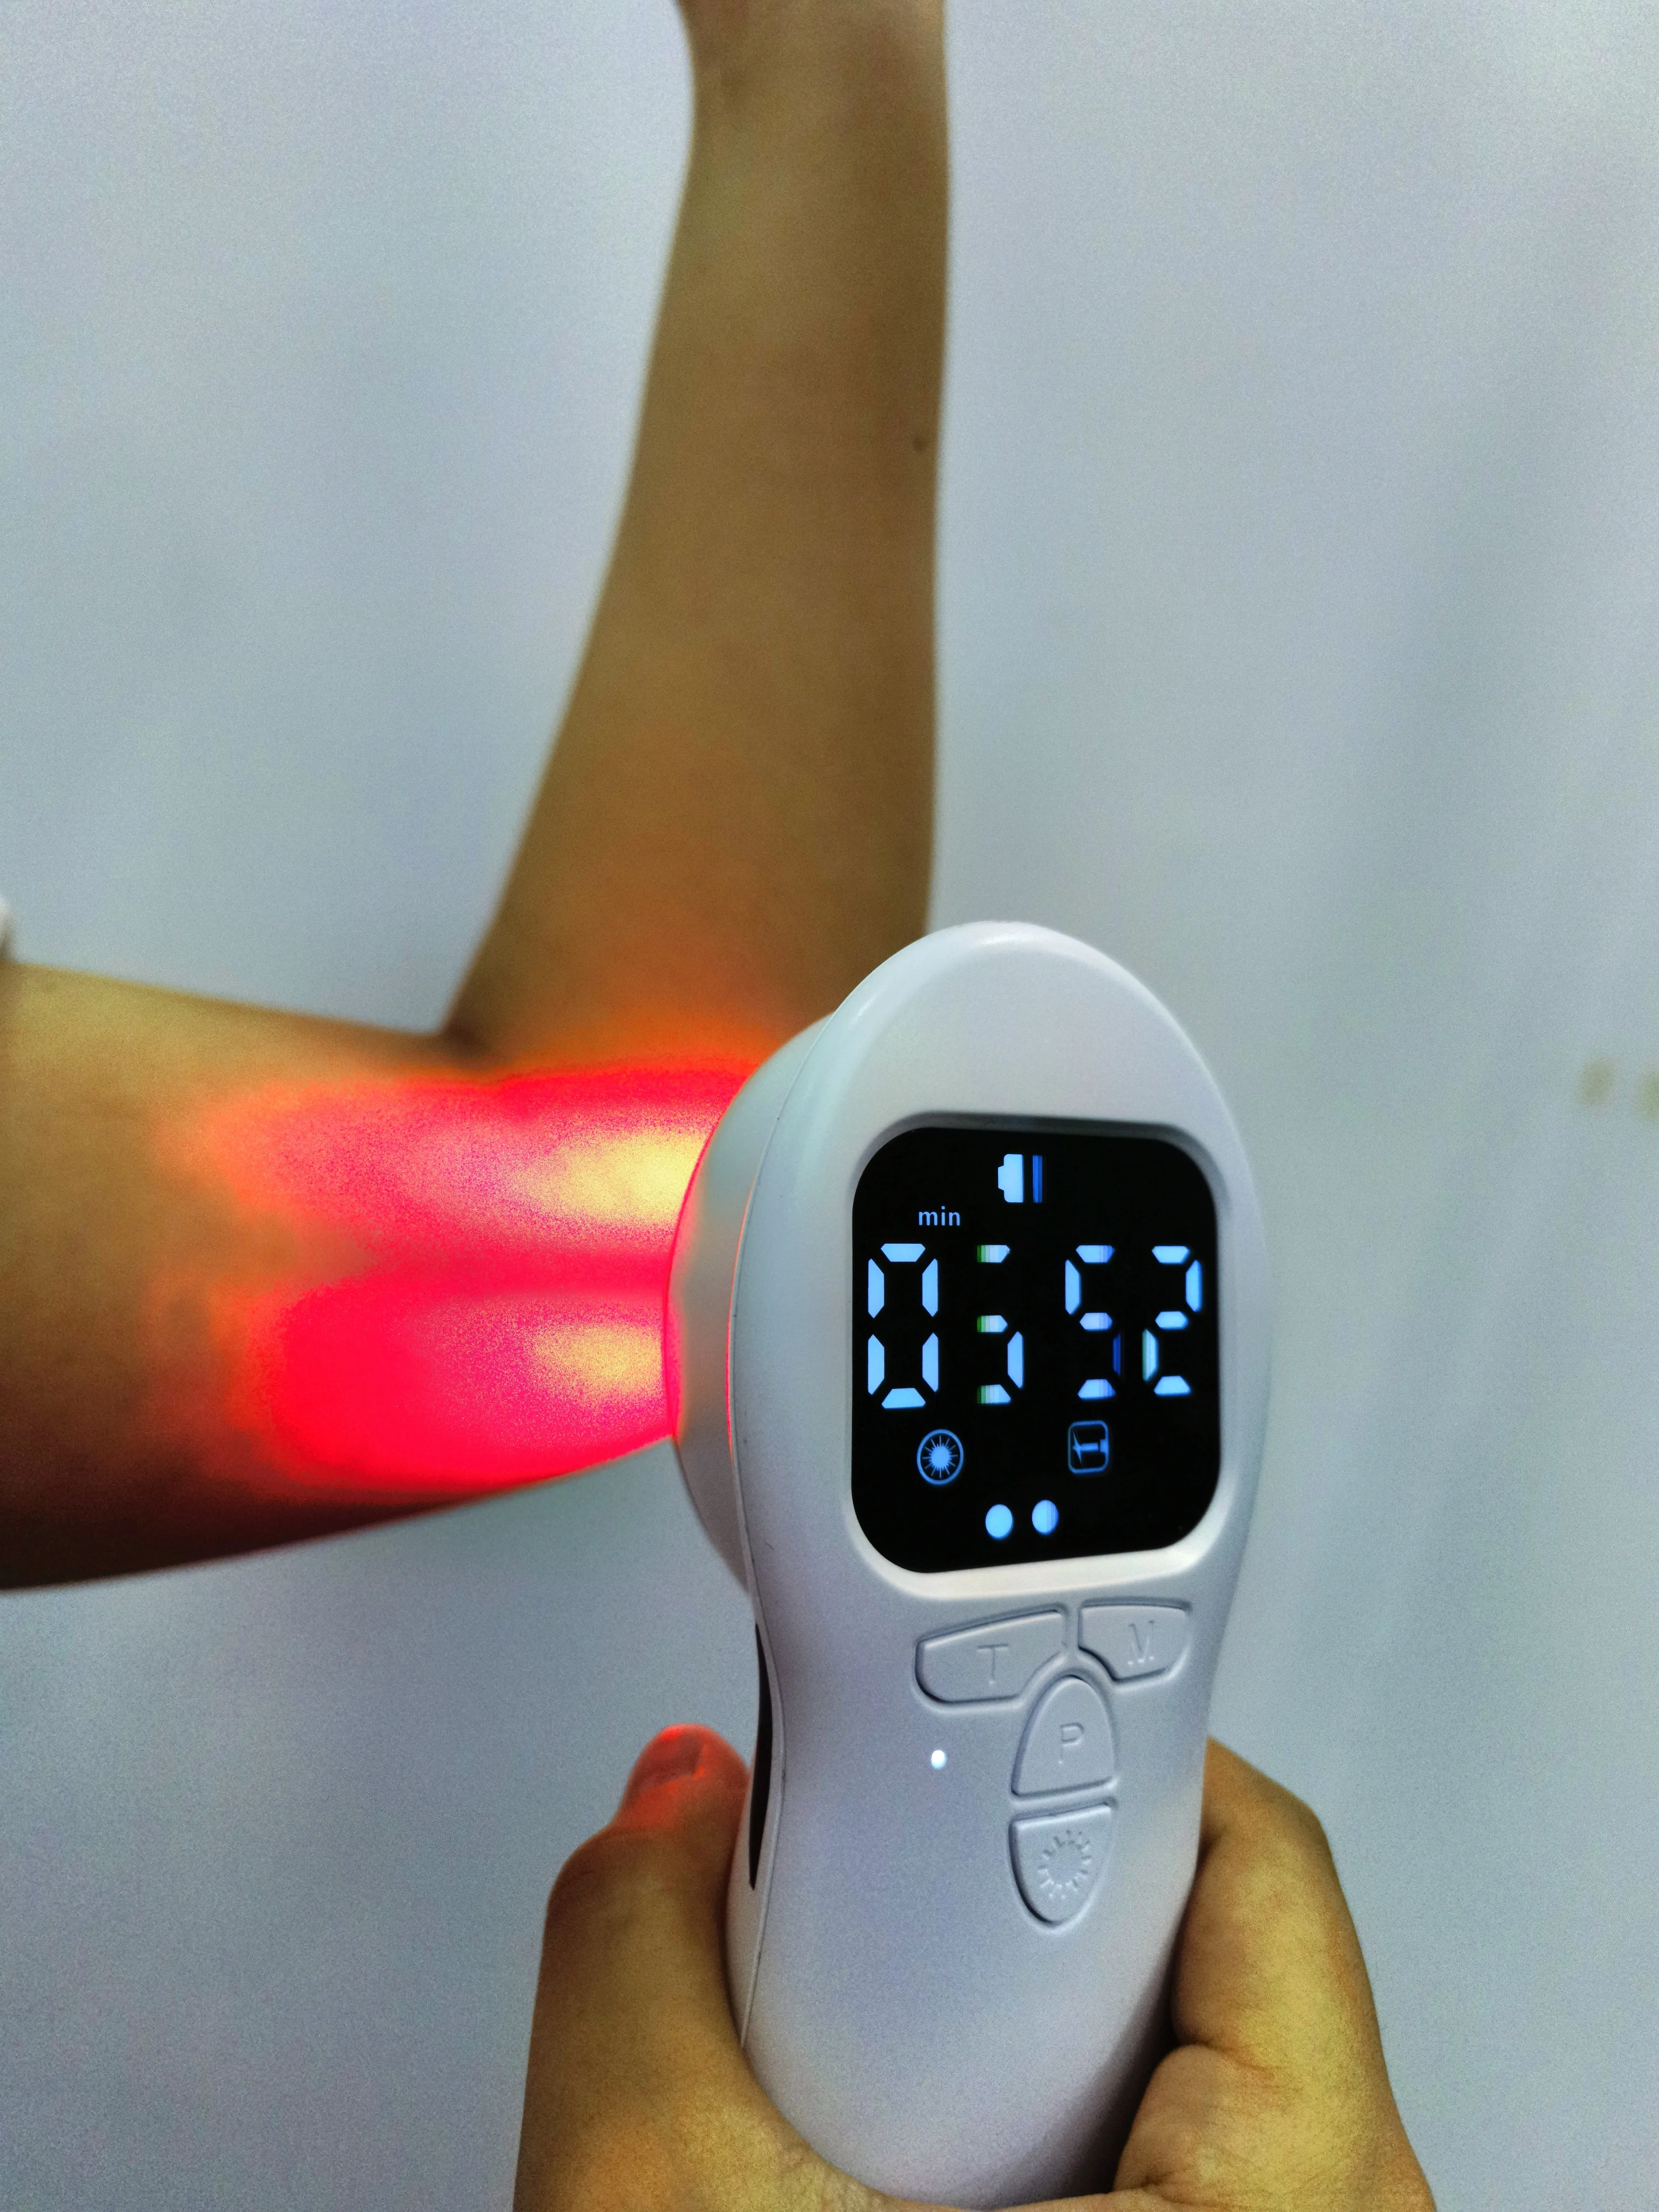 

Home Laser Therapy Device for Knee Pain Relief Arm Arthritis Tennis Elbow Handheld Physical Therapy LLLT Physiotherapy